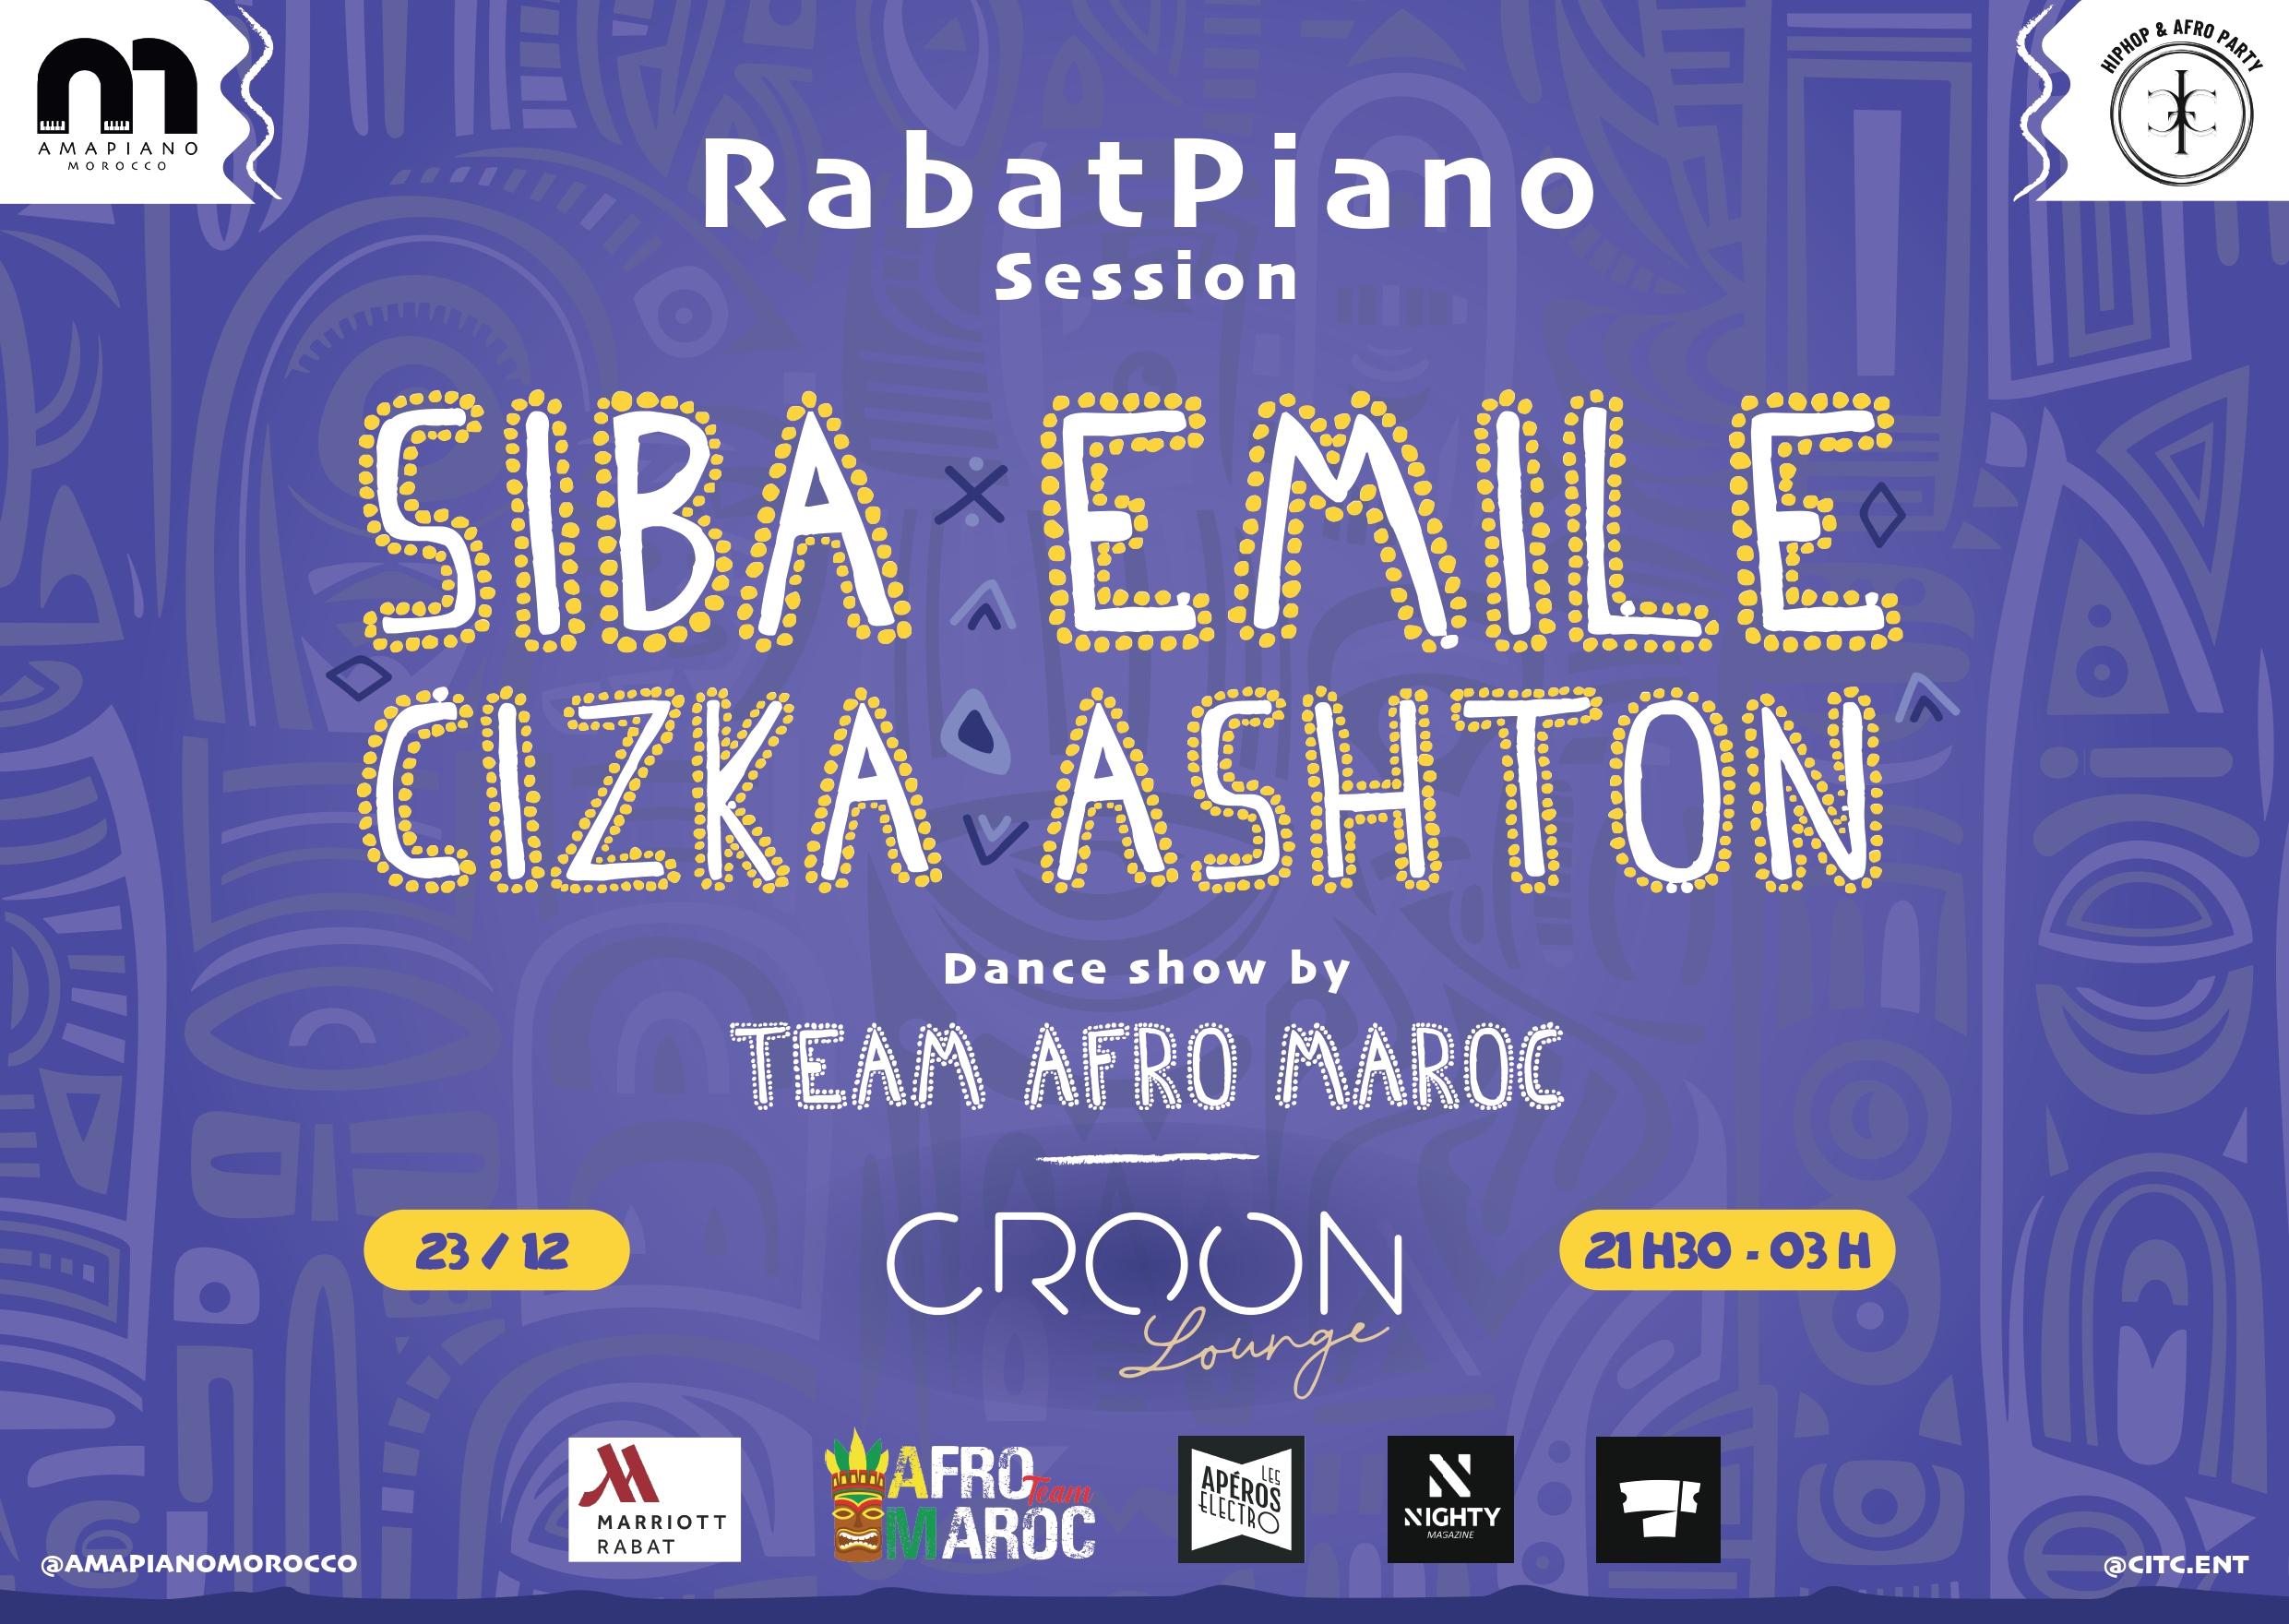 Christmas Party at @Croon.lounge : Let's revive RabatPiano on December 23rd